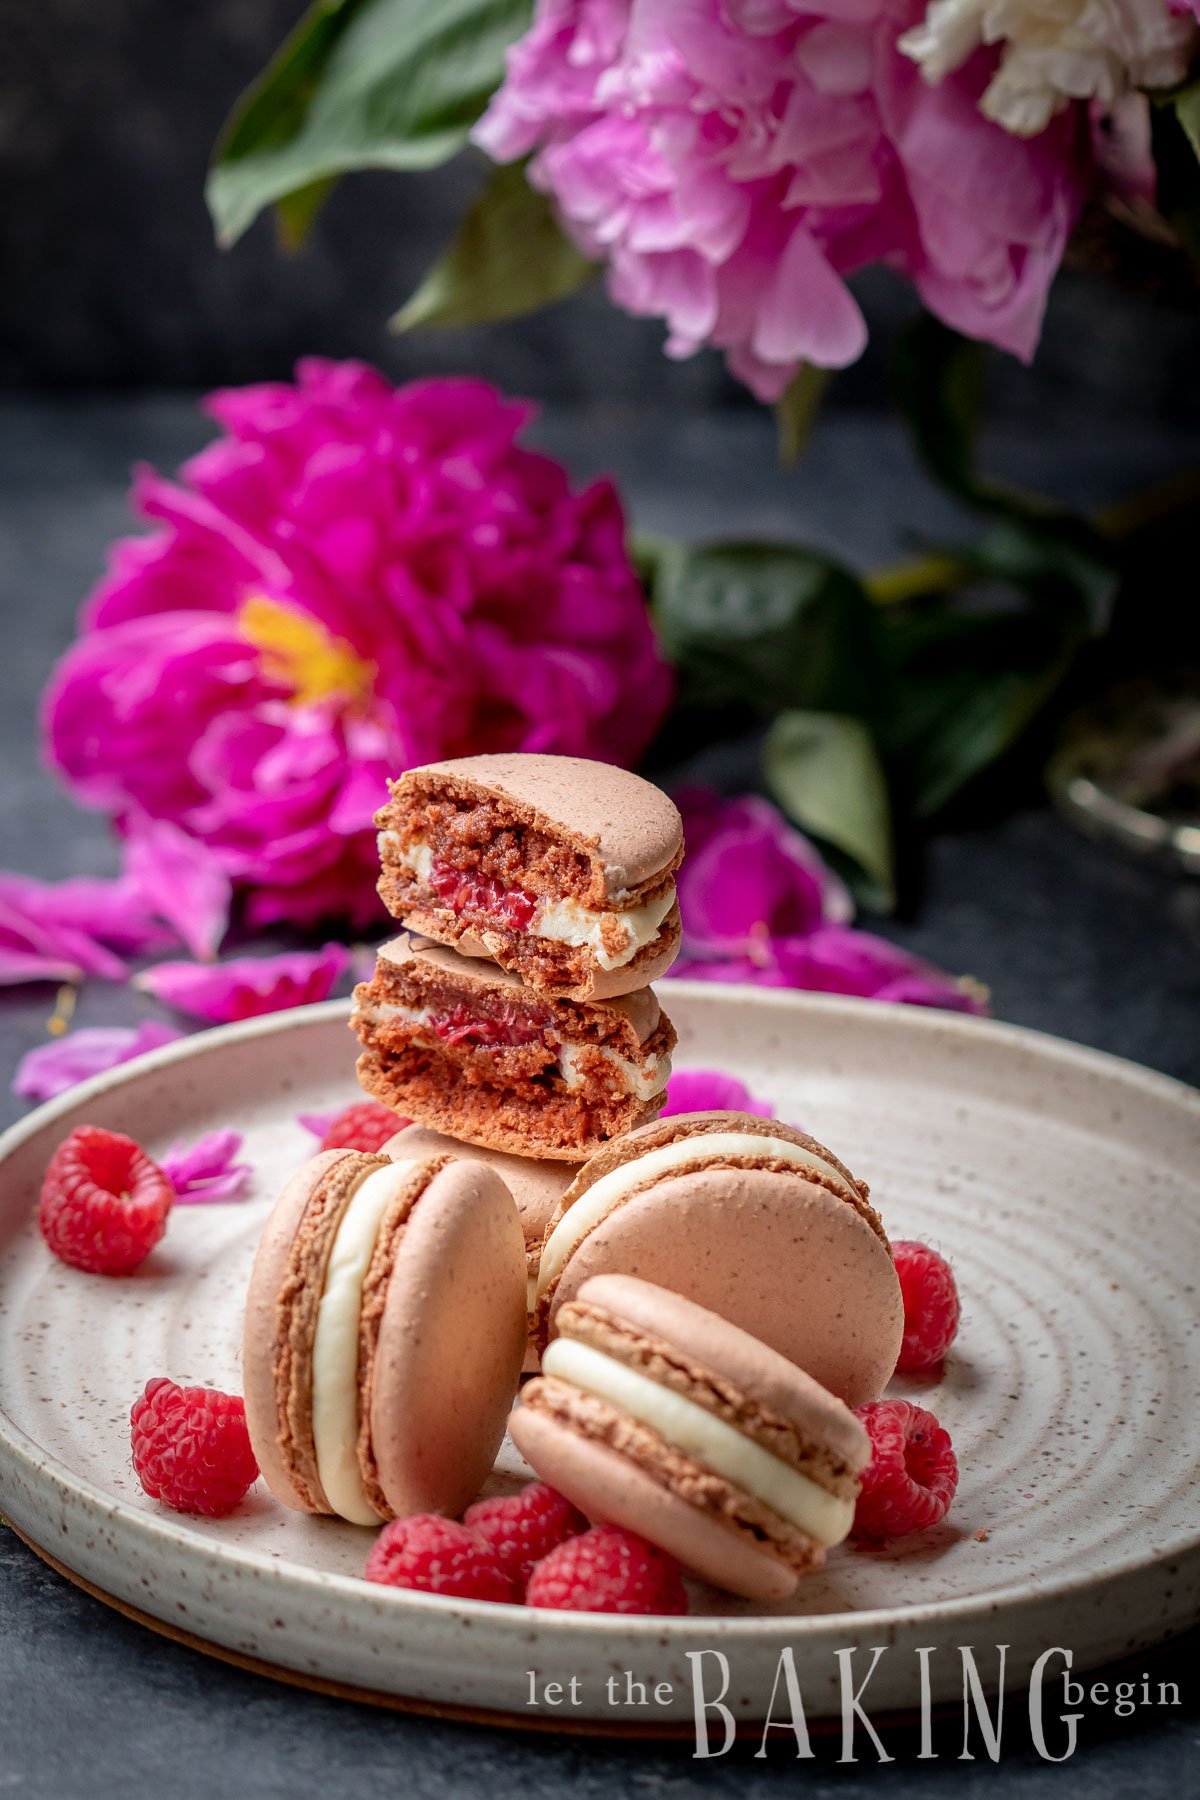 White Chocolate Macarons are made with Italian Meringue Macaron shells, White Chocolate Ganache and a fresh raspberry. The flavor of these meringue cookies can be customized by changing the raspberry to any other berry or fruit. 